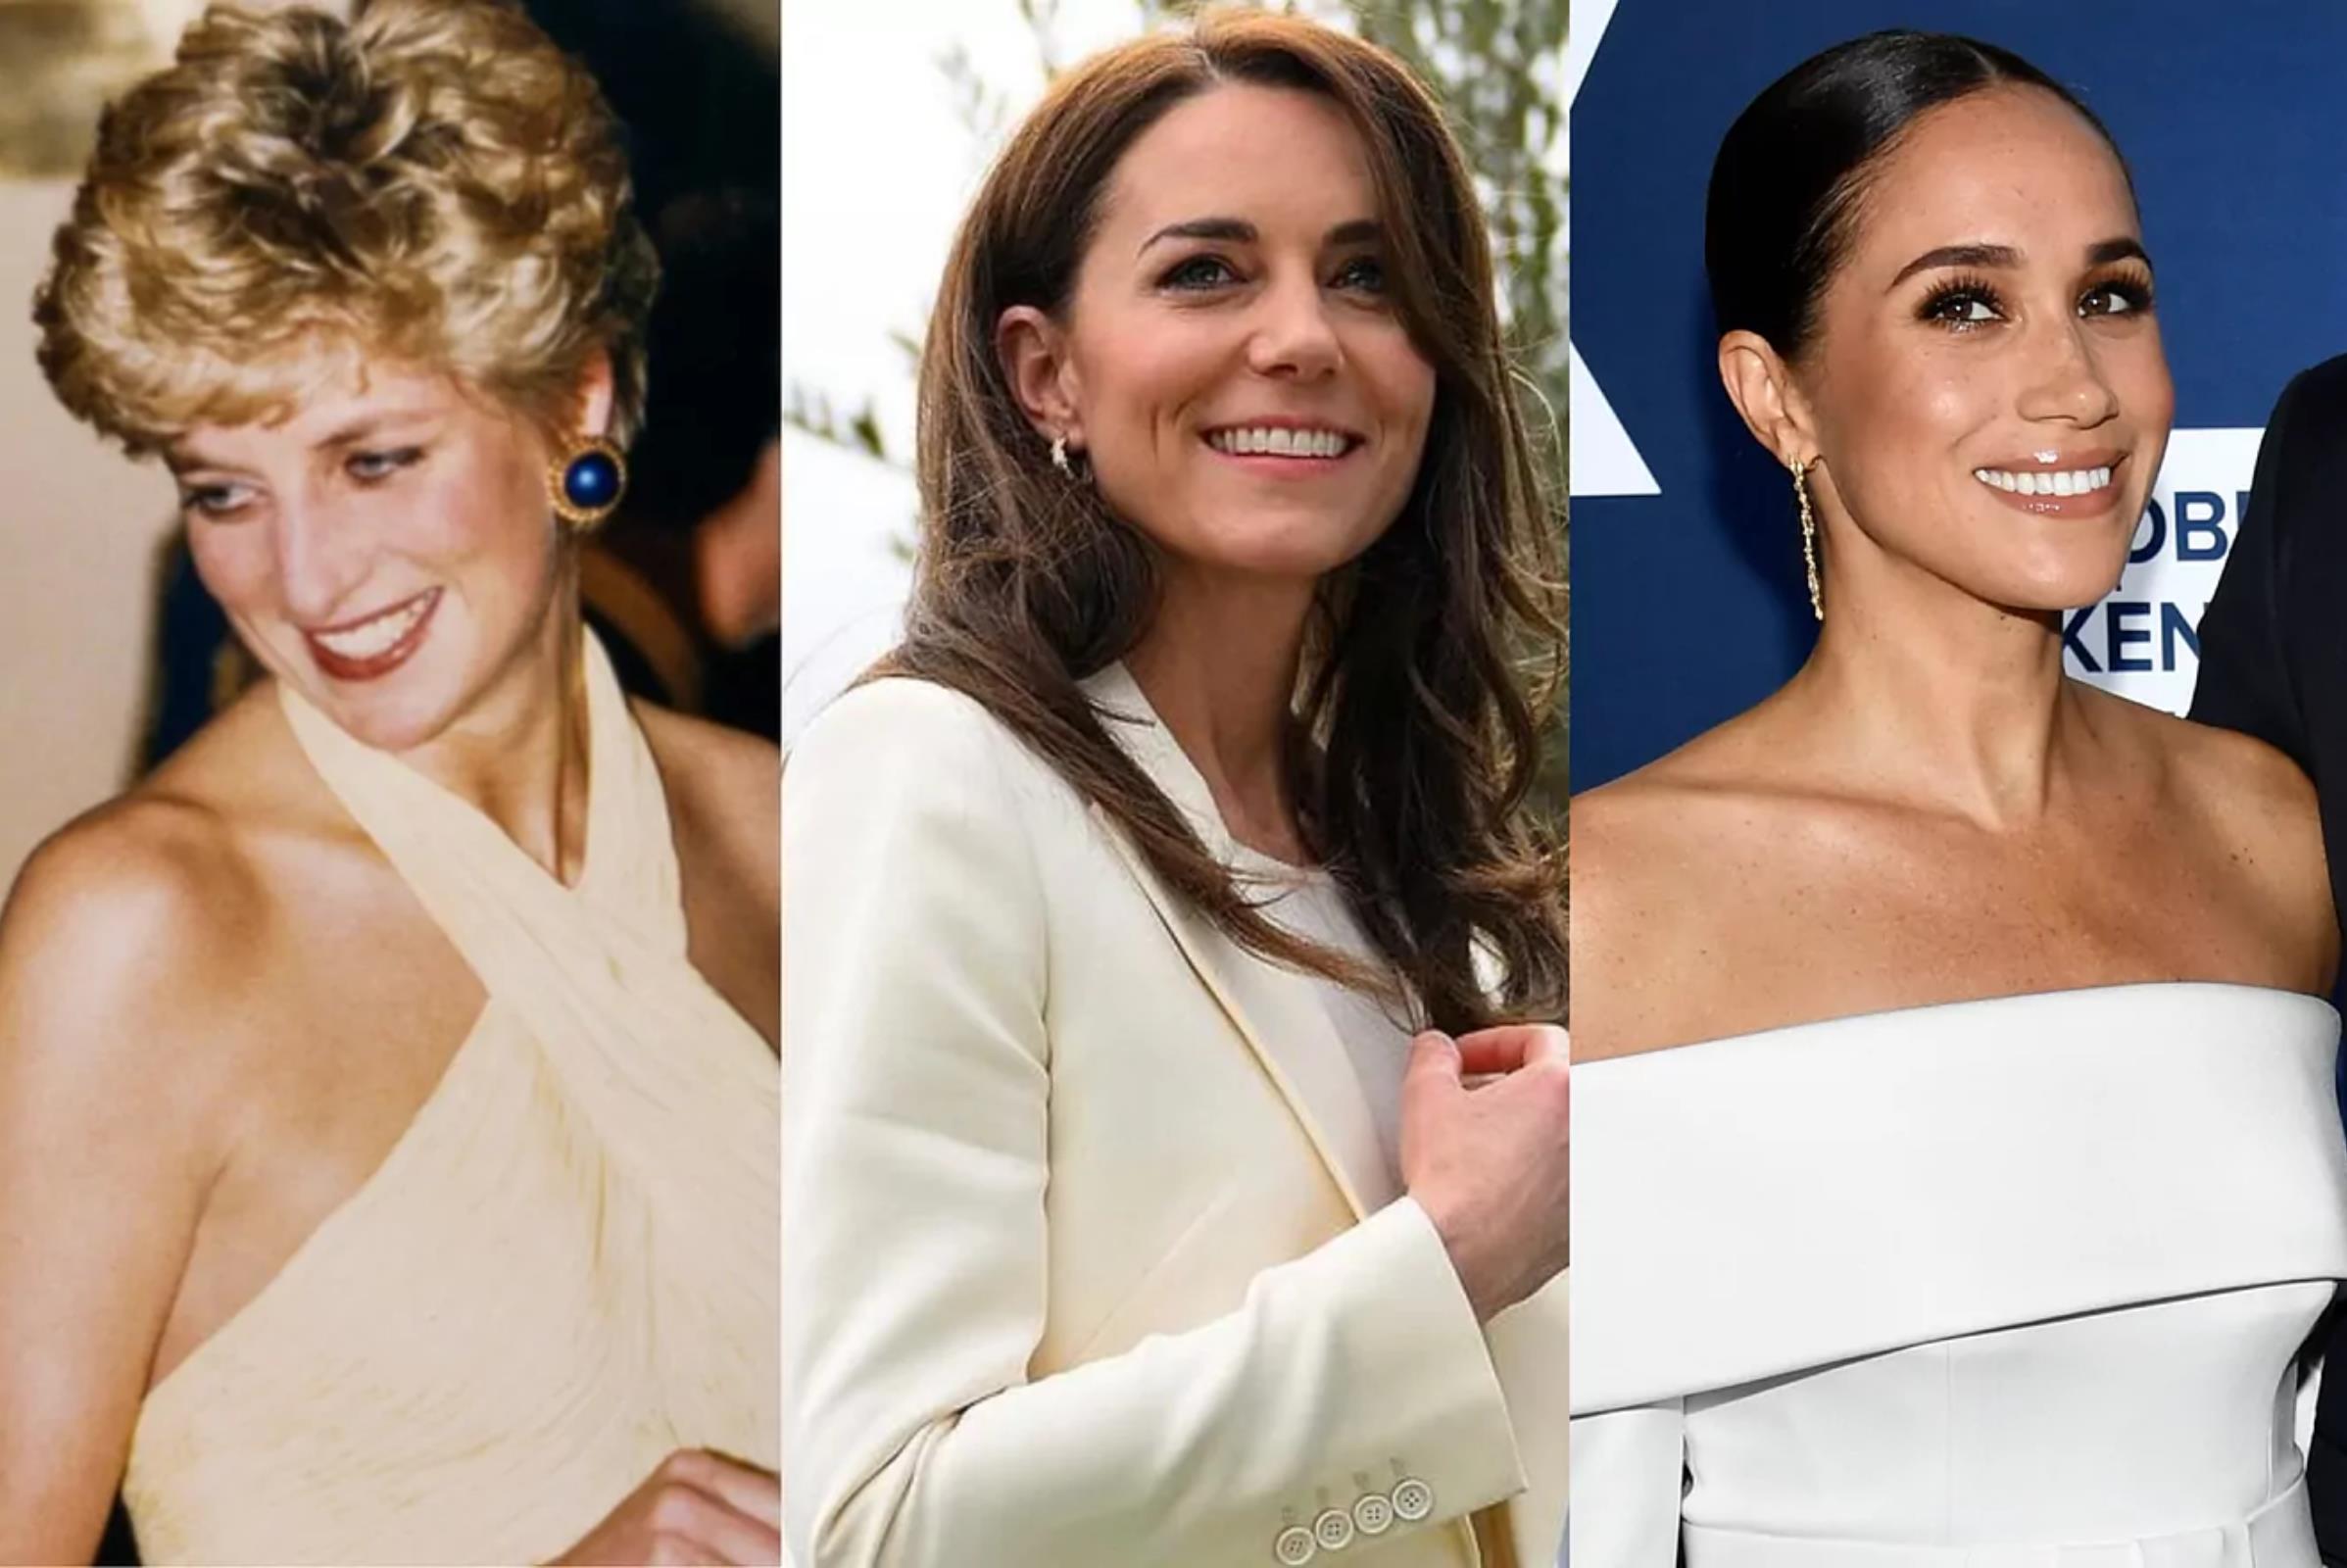 customized-sex-dolls-of-style-as-diana-kate-and-meghan-are-the-most-in-demand